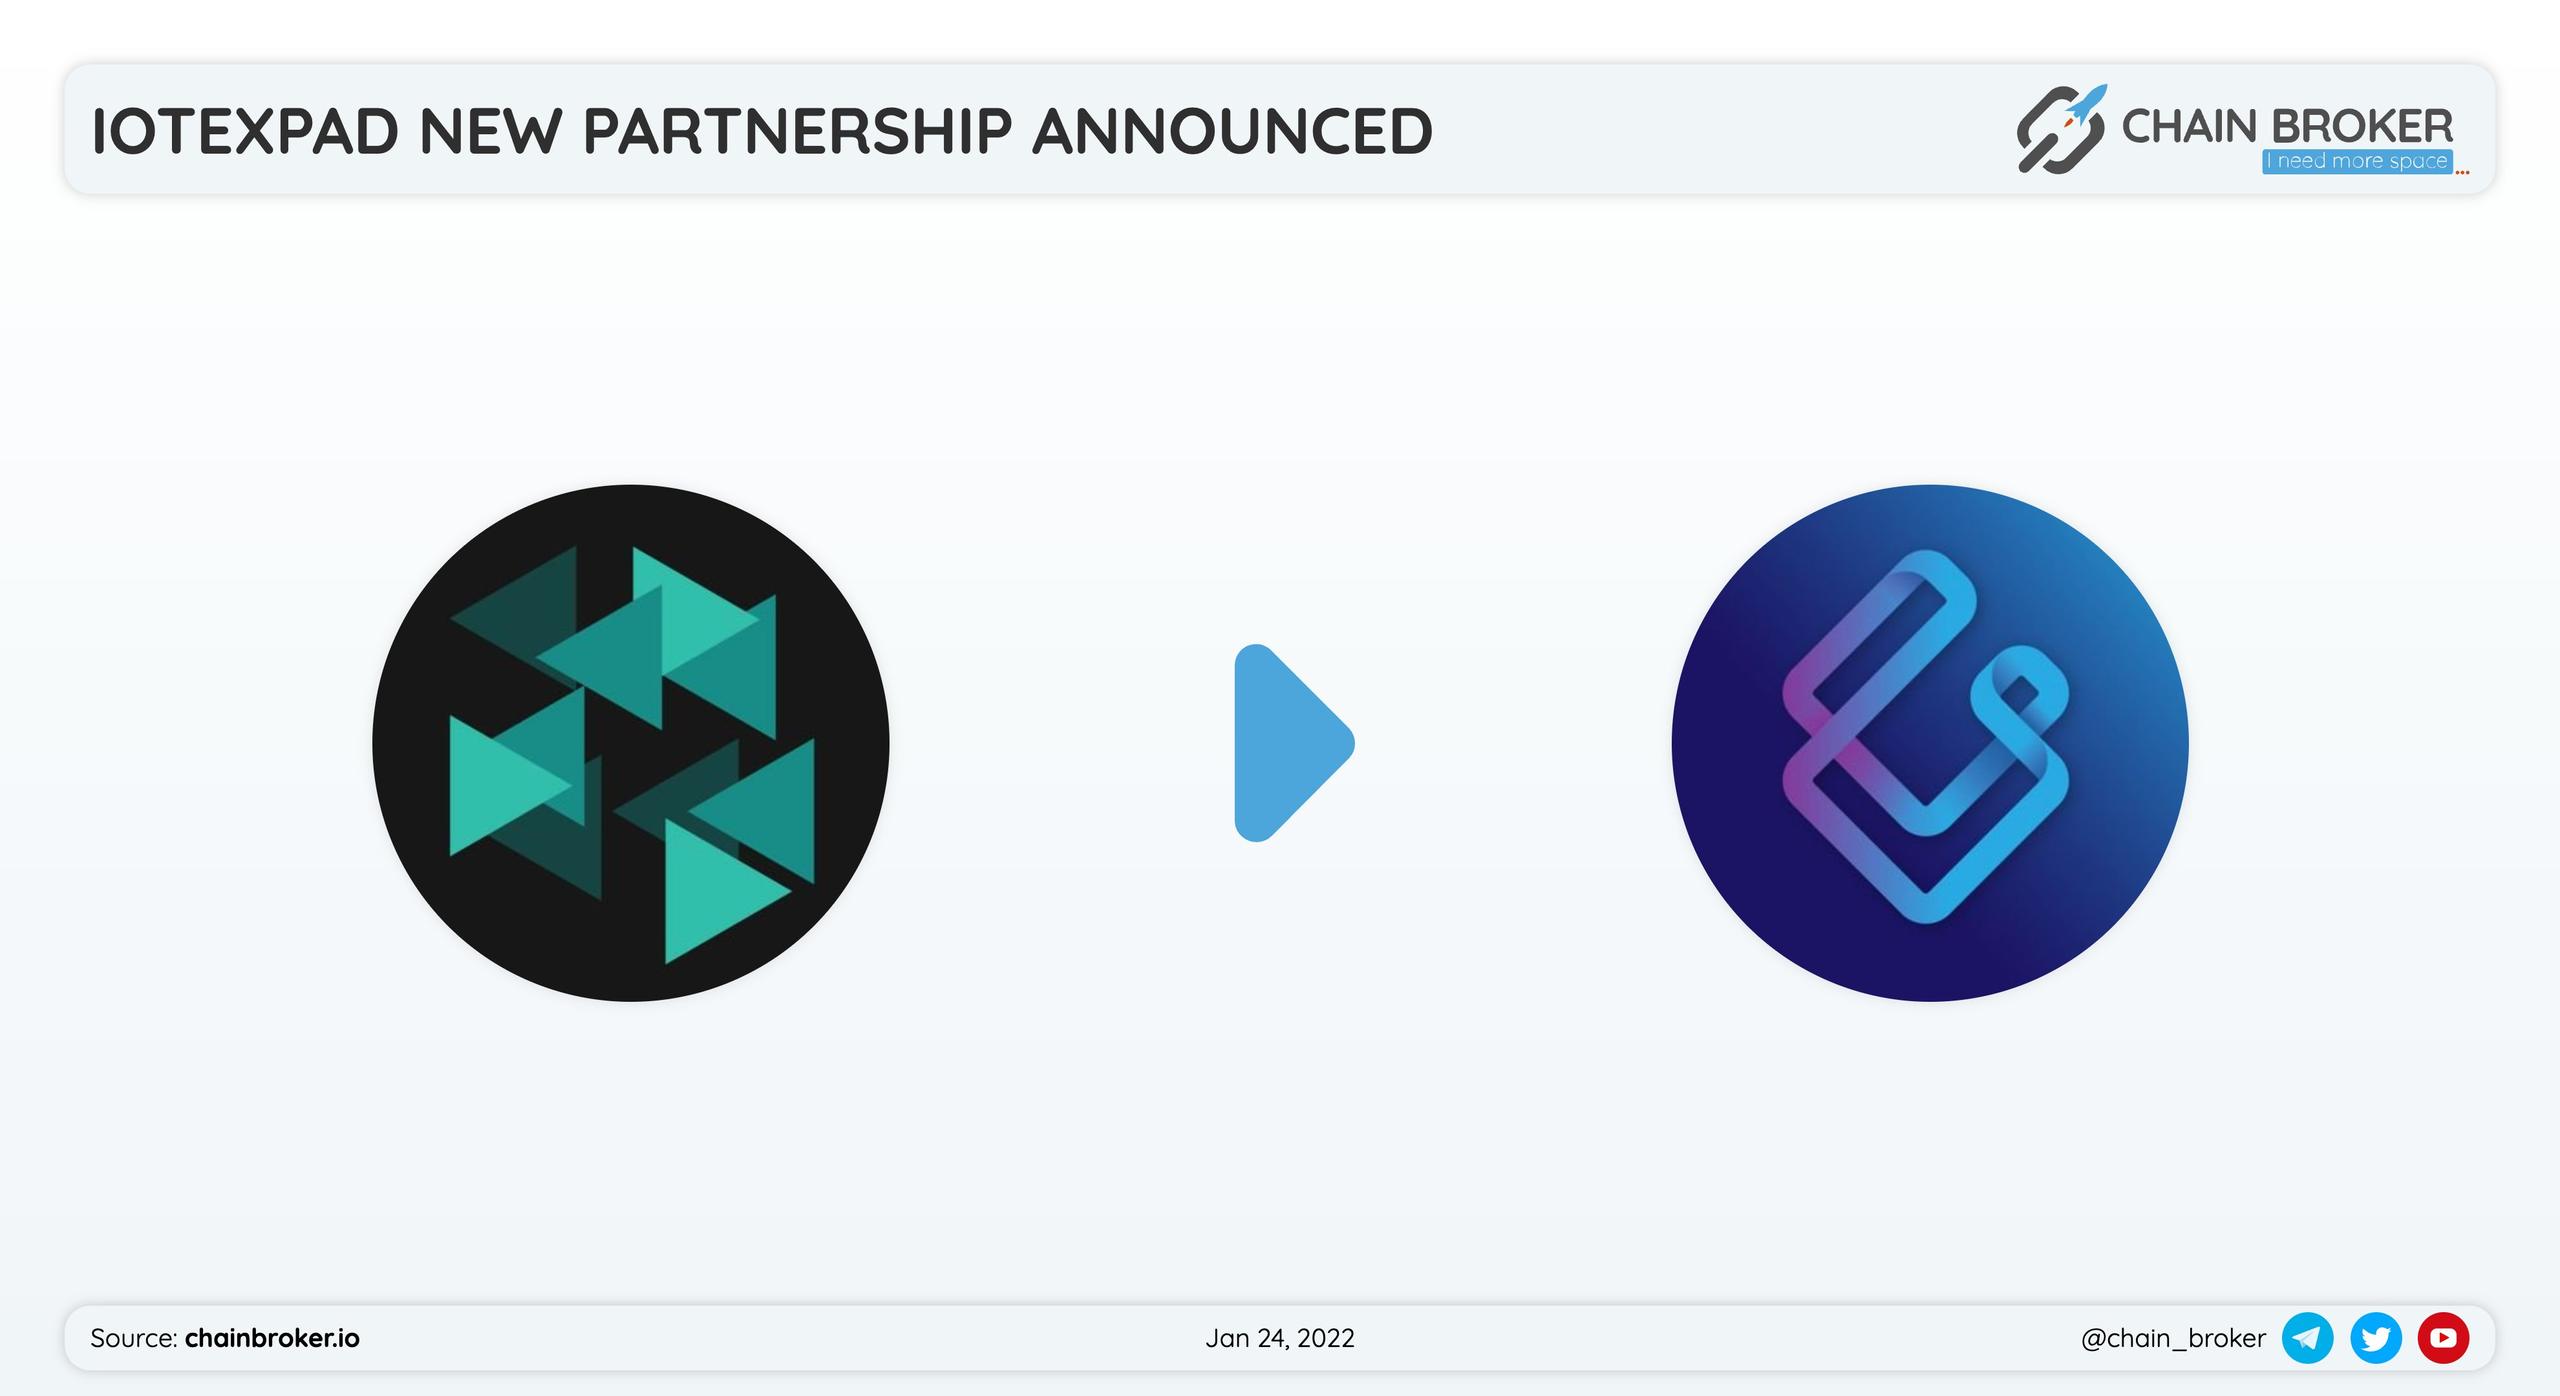 IotexPad has partnered with Paragen for an IoTeX #network acceleration